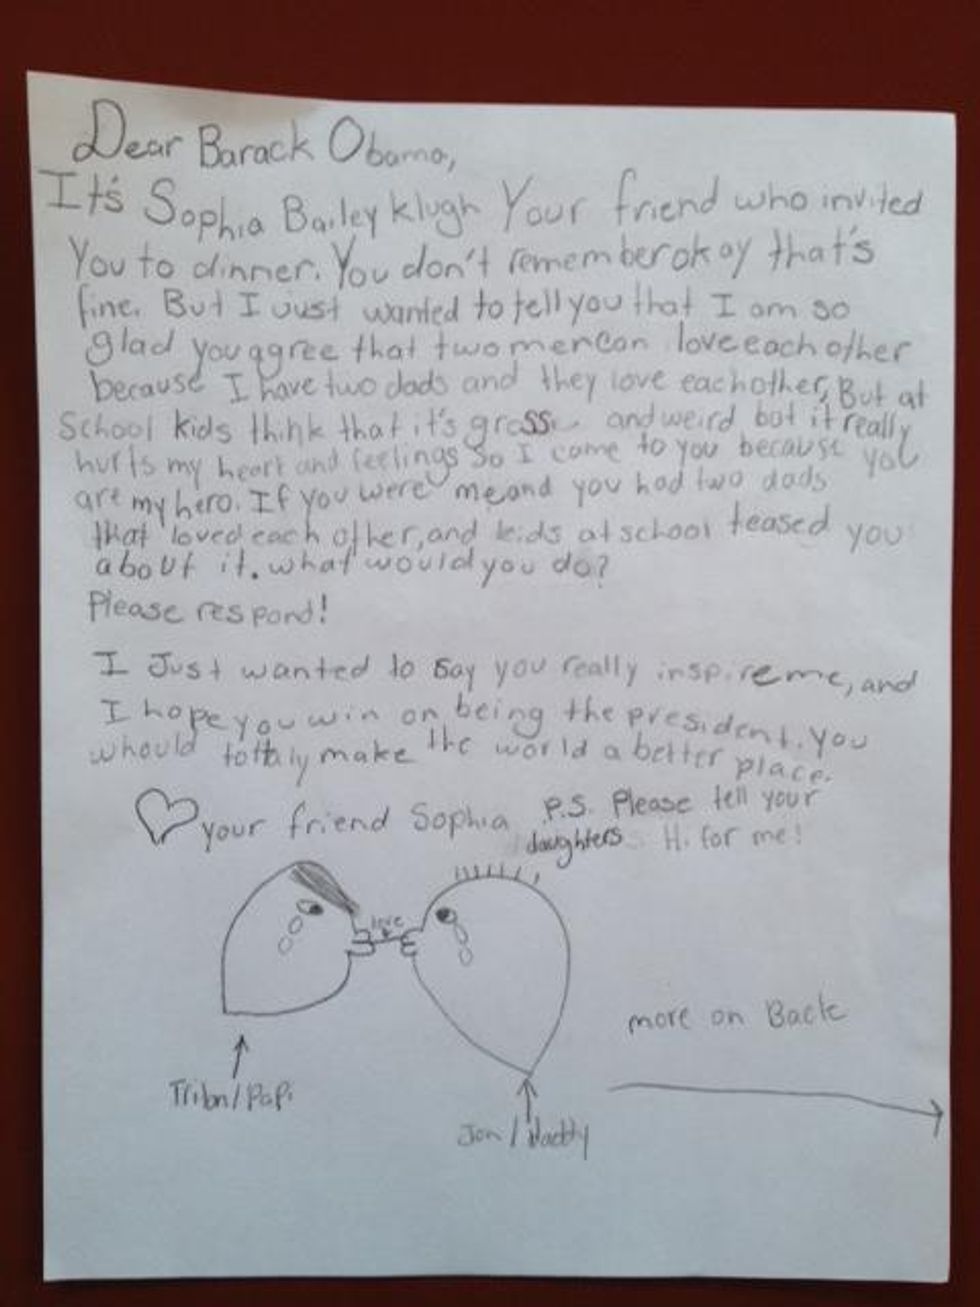 Obama Sends Letter To Girl Who Wrote To Him About Her Two Dads That Will Not Make You Cry At All